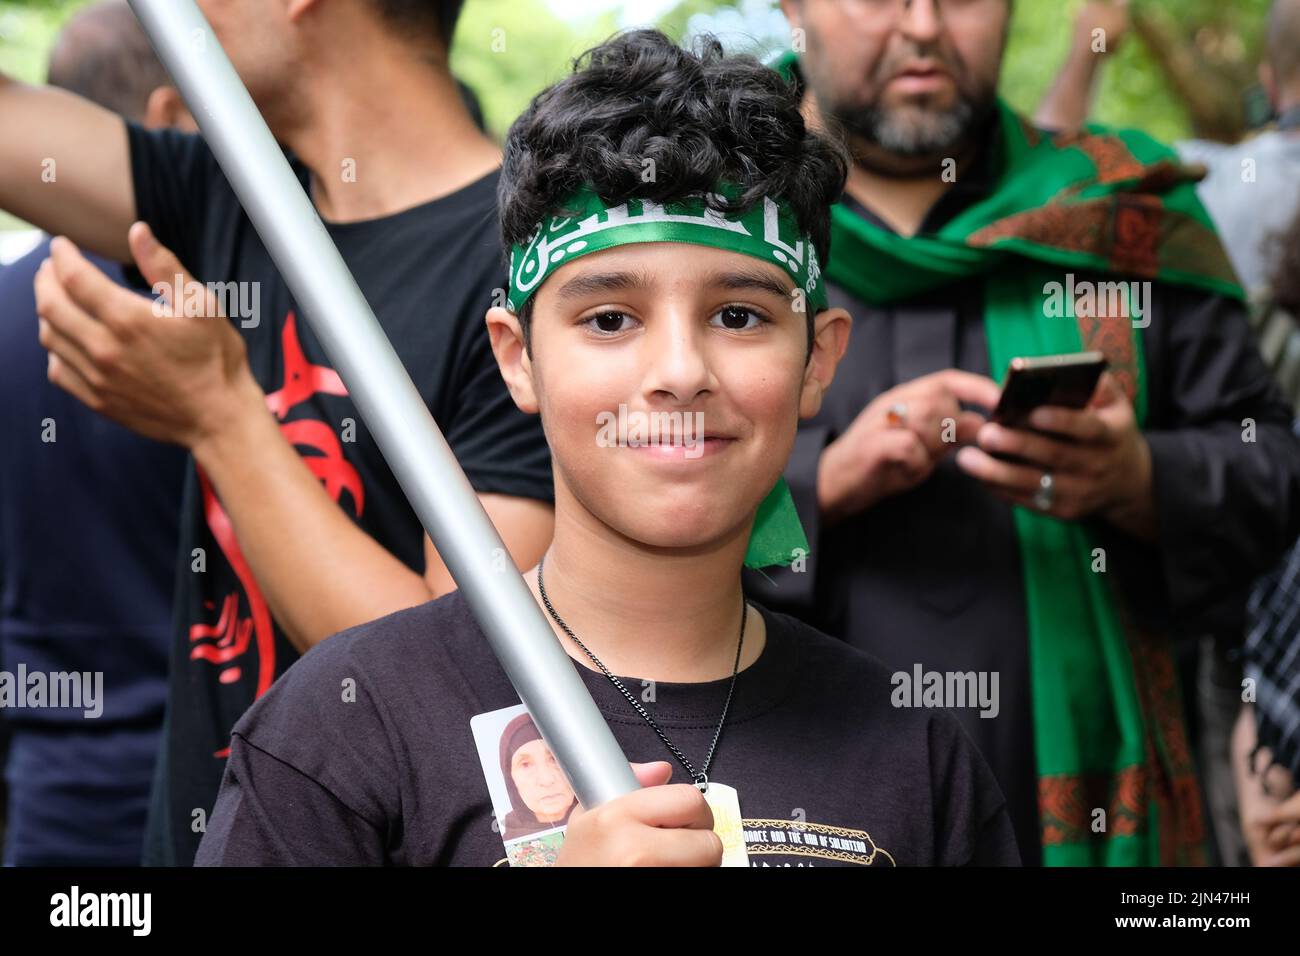 London, UK, 8th Aug, 2022. Shia muslims commemorate Prophet Muhammed's grandson, Huseyn ibn Ali's (Imam Hussain) martyrdom in an annual Ashura procession that has taken place in the capital since 1989. Imam Hussain was killed during the Battle of Kabala, Iraq in 680AD and is a major pilgrimage site attracting millions of worshippers. The Day of Ashura falls on the tenth day of Muharram, the first month of the Islamic calendar and is a period of mourning for Shias marked by the wearing of black, chest beating and re-enactments. Credit: Eleventh Hour Photography/Alamy Live News Stock Photo